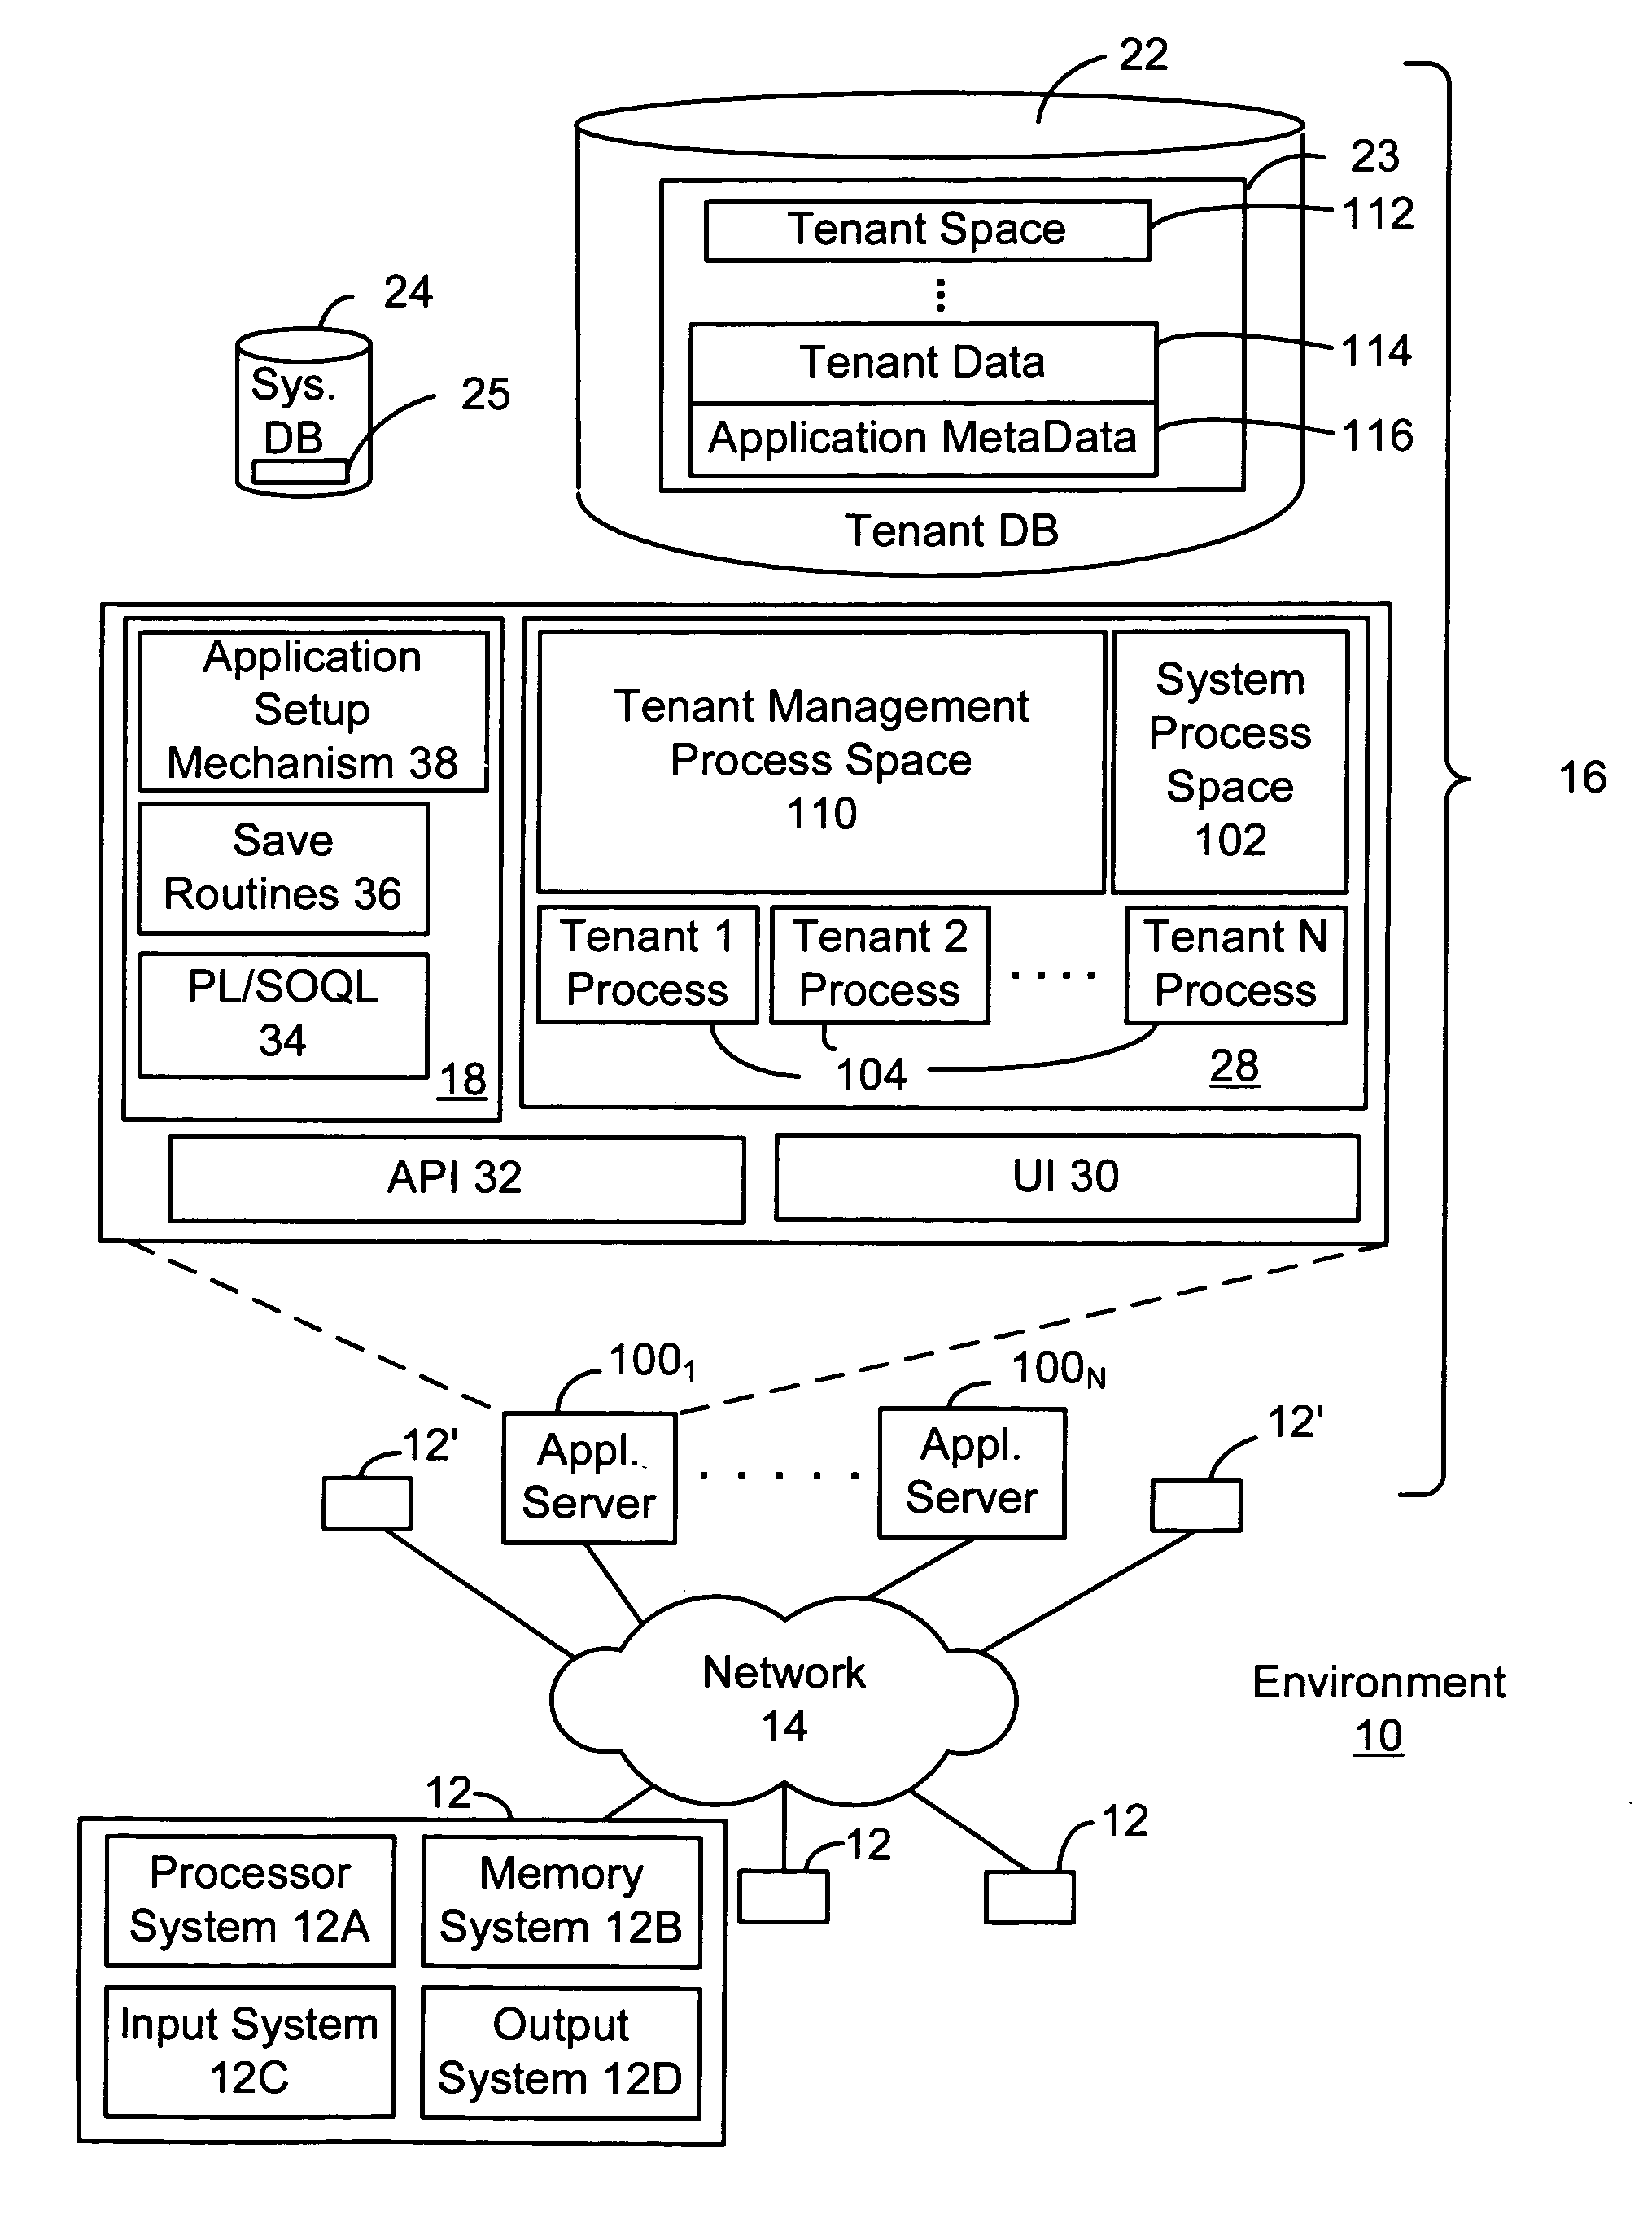 Method and system for automatically updating a software QA Test repository